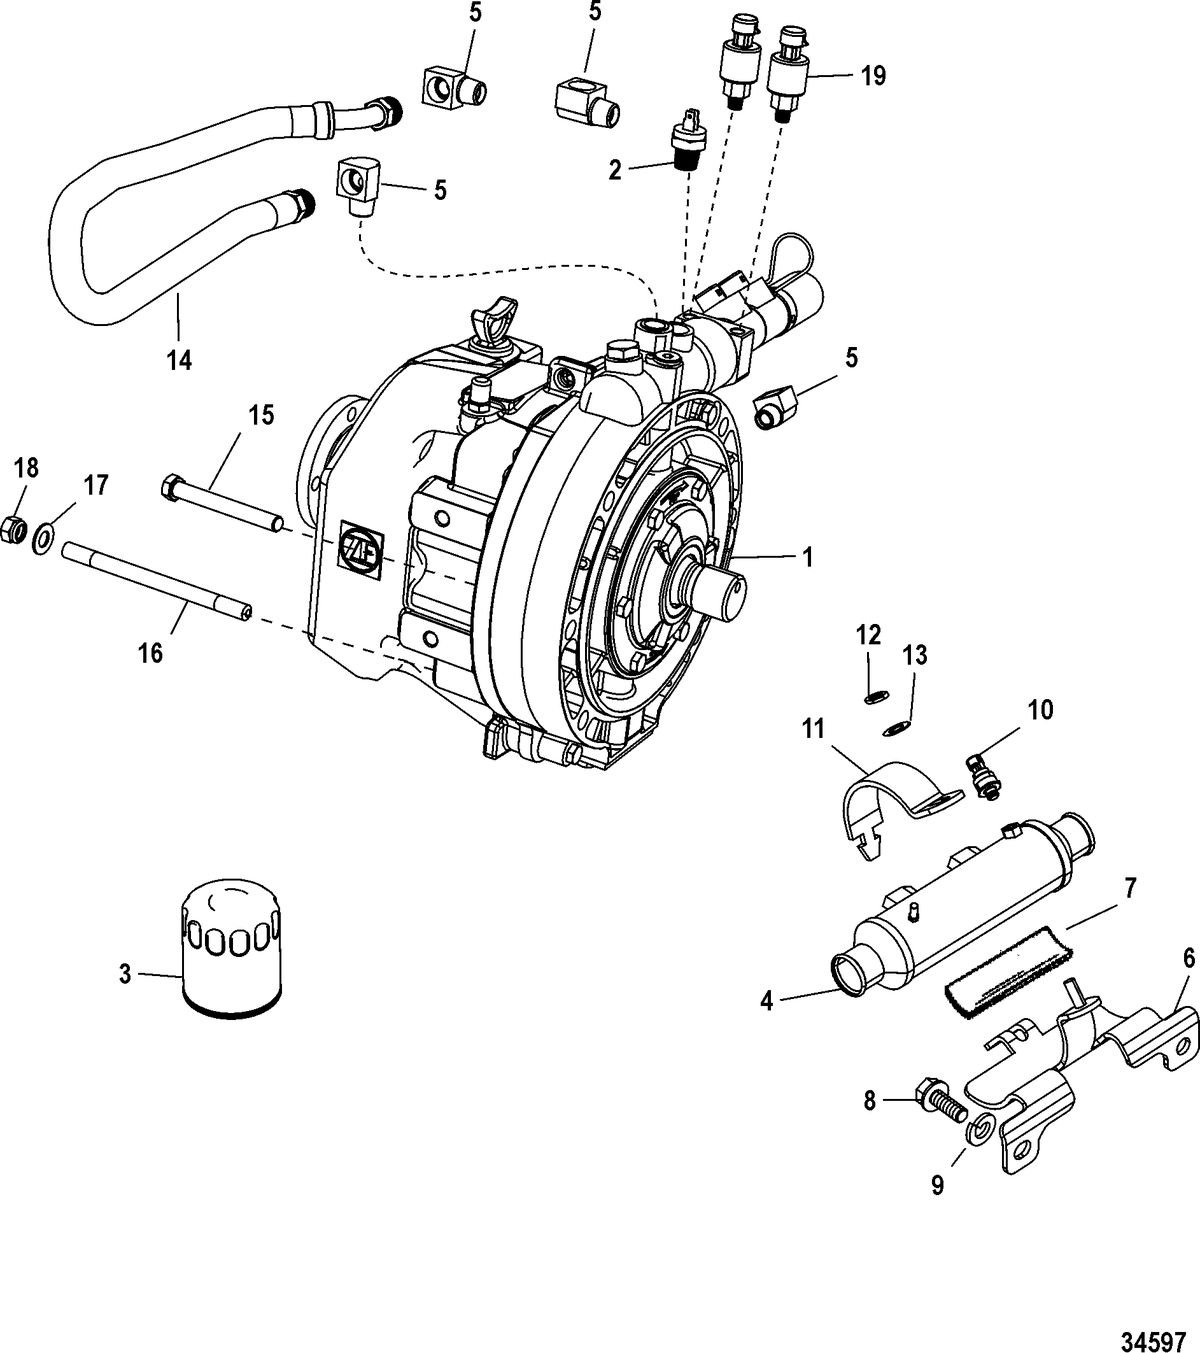 MERCRUISER 8.1L TOWSPORT MPI Transmission And Related Parts(ZF - 63C)